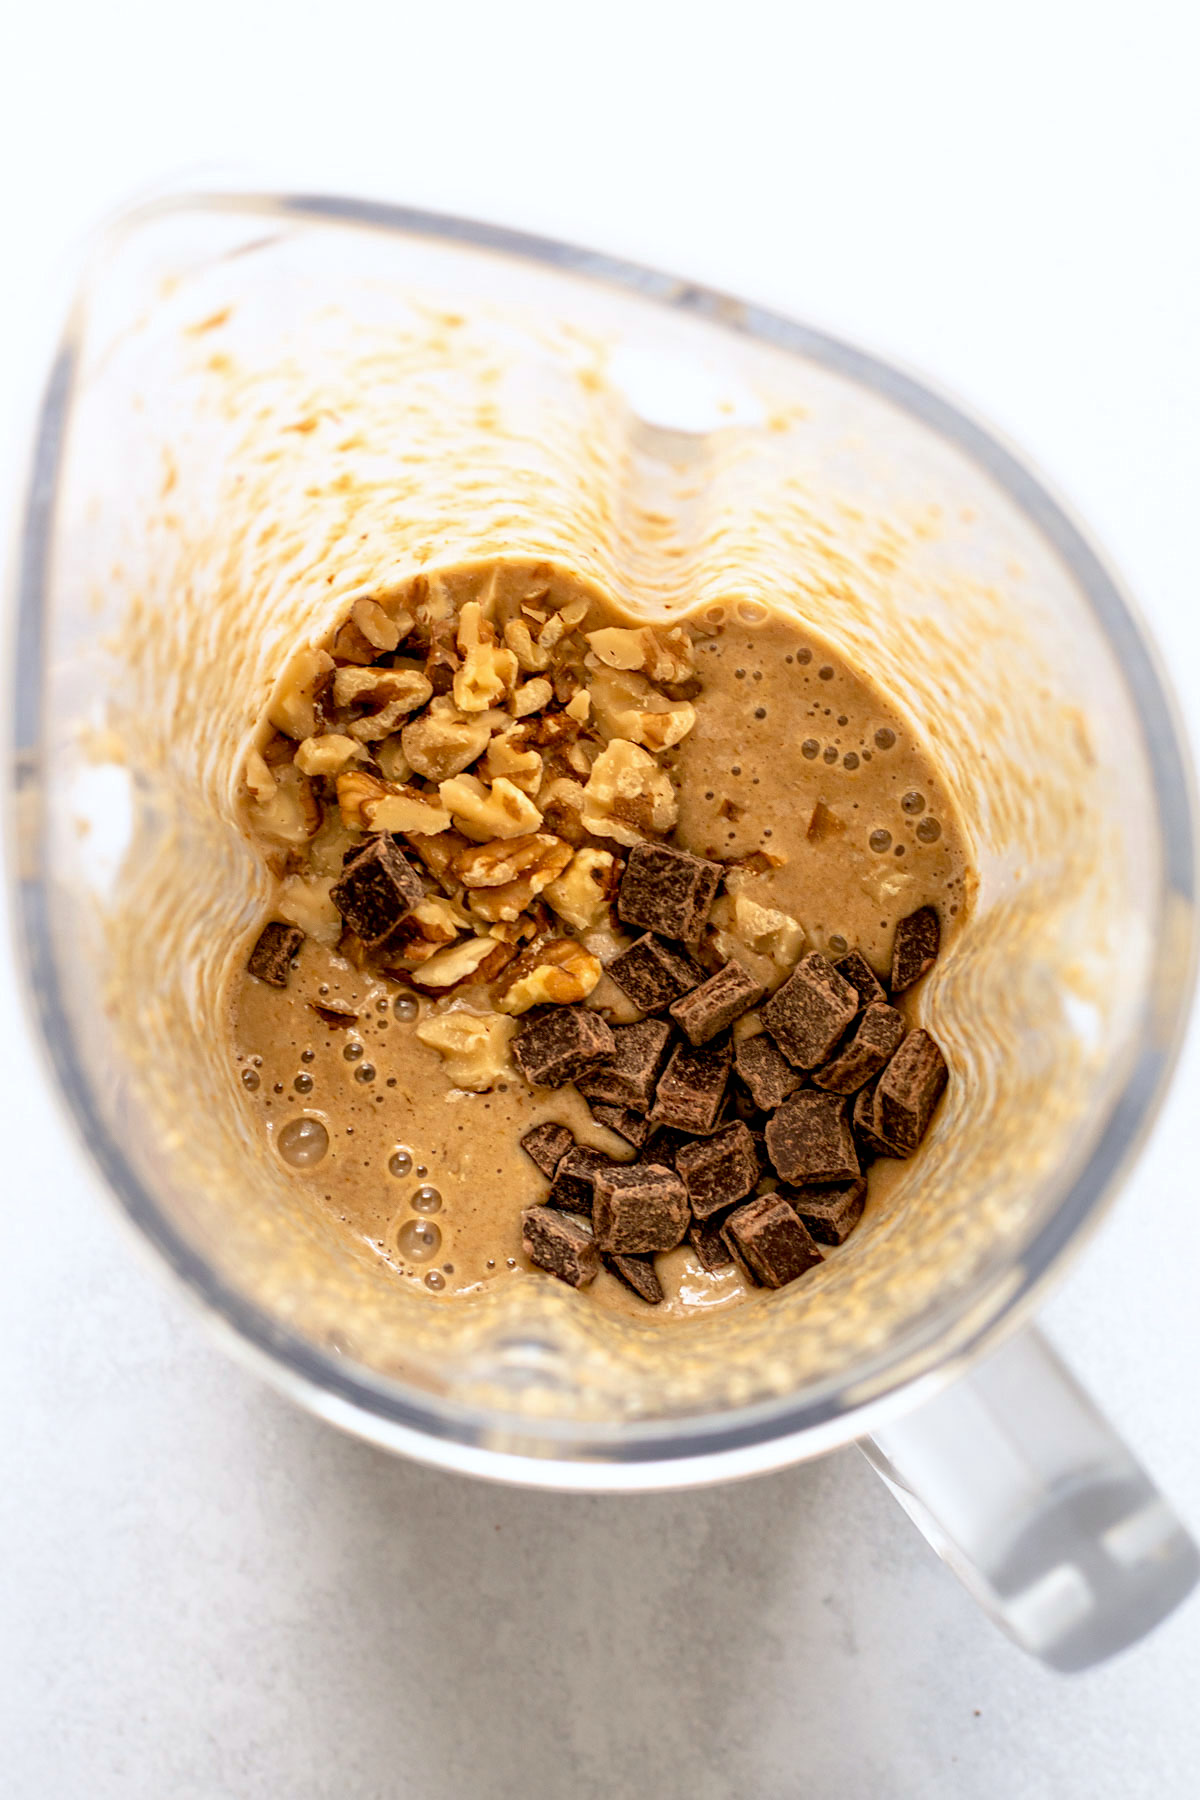 Chunky monkey ingredients added into the oat batter in a blender.